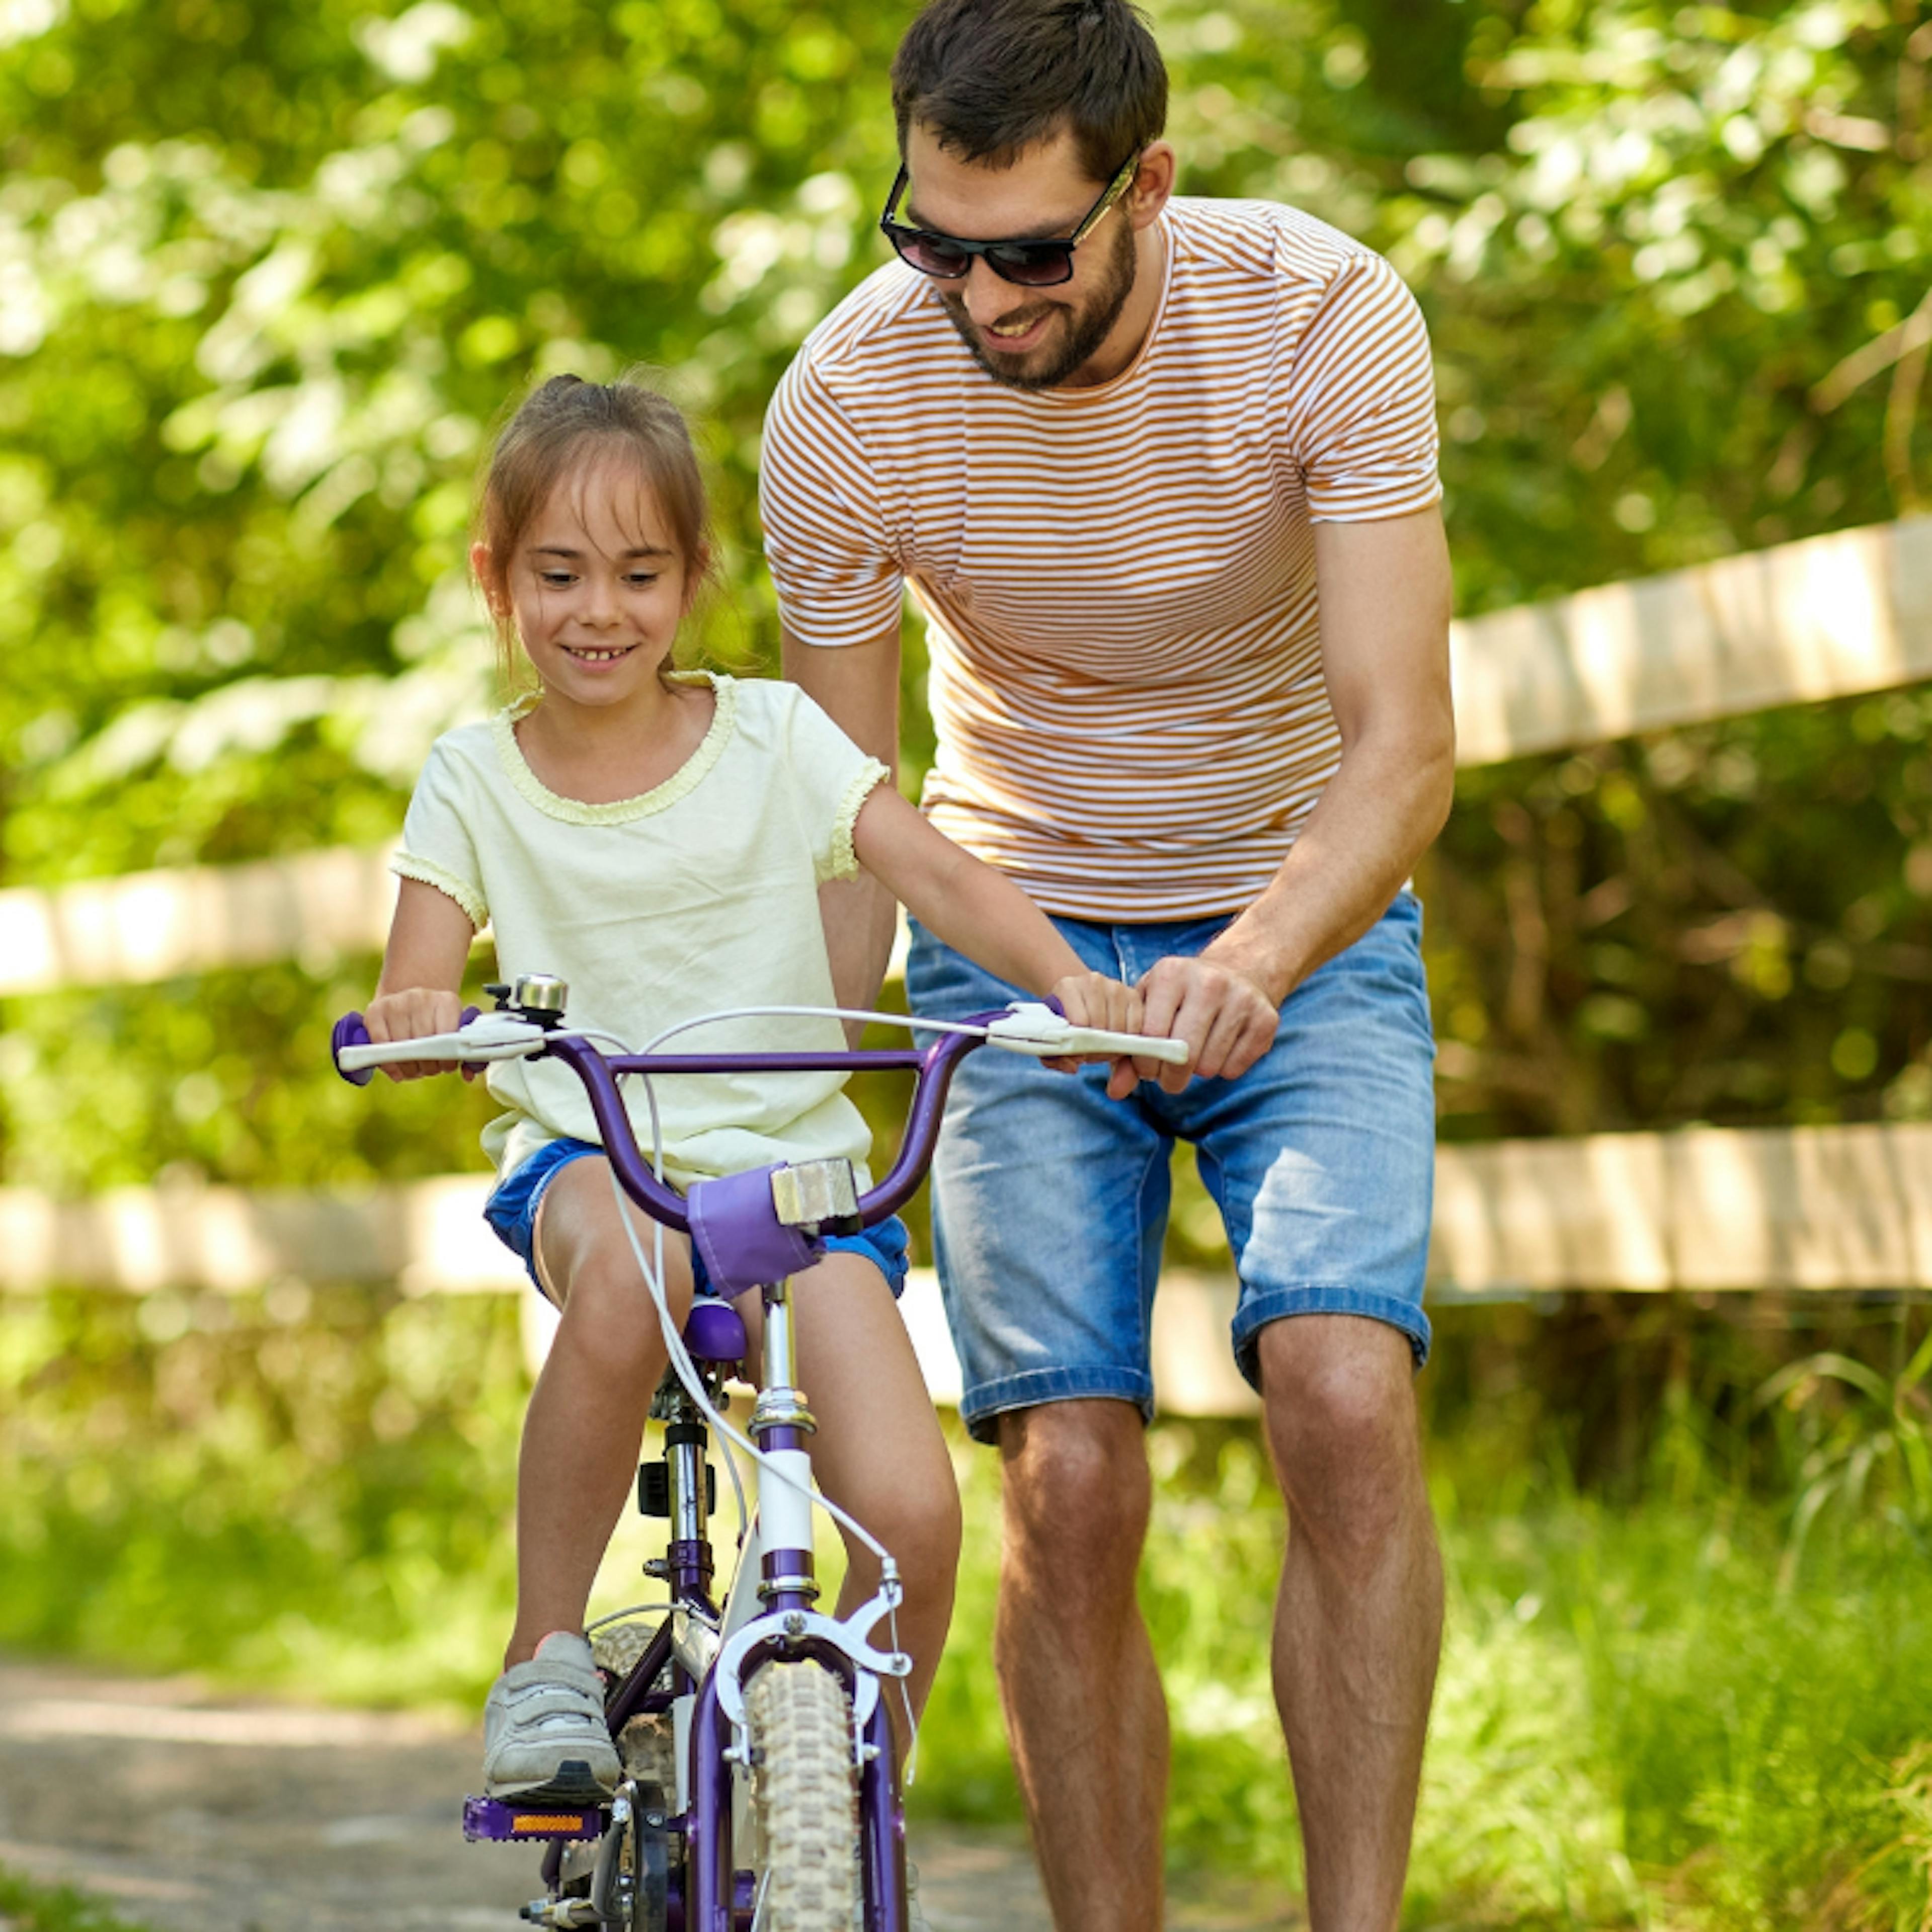 Girl learning to ride bike with dad